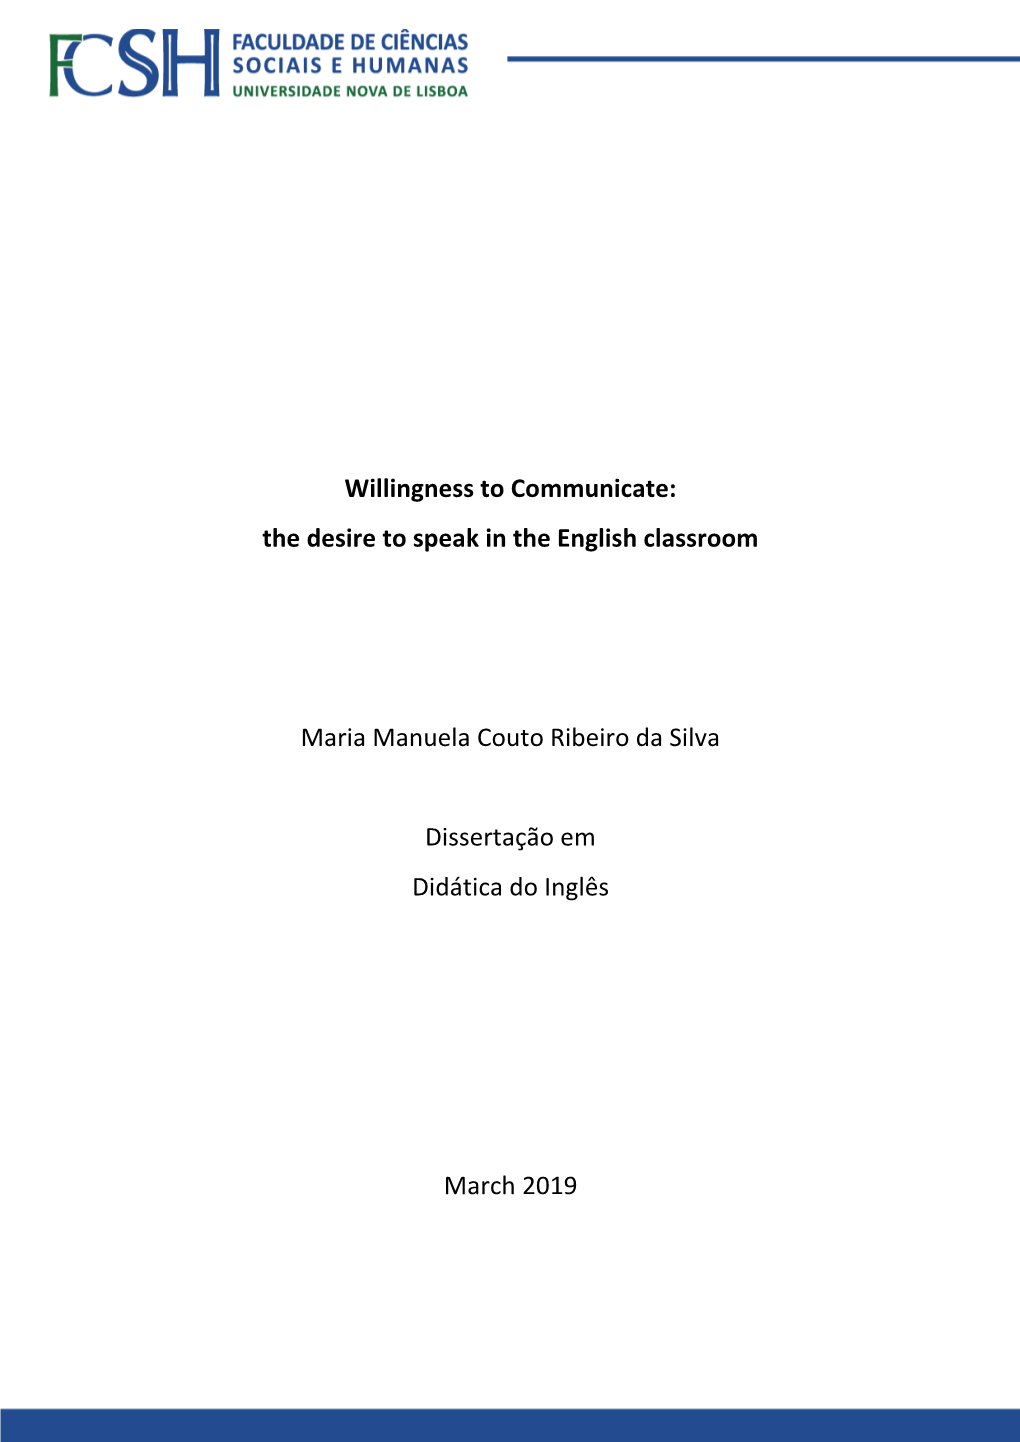 Willingness to Communicate: the Desire to Speak in the English Classroom